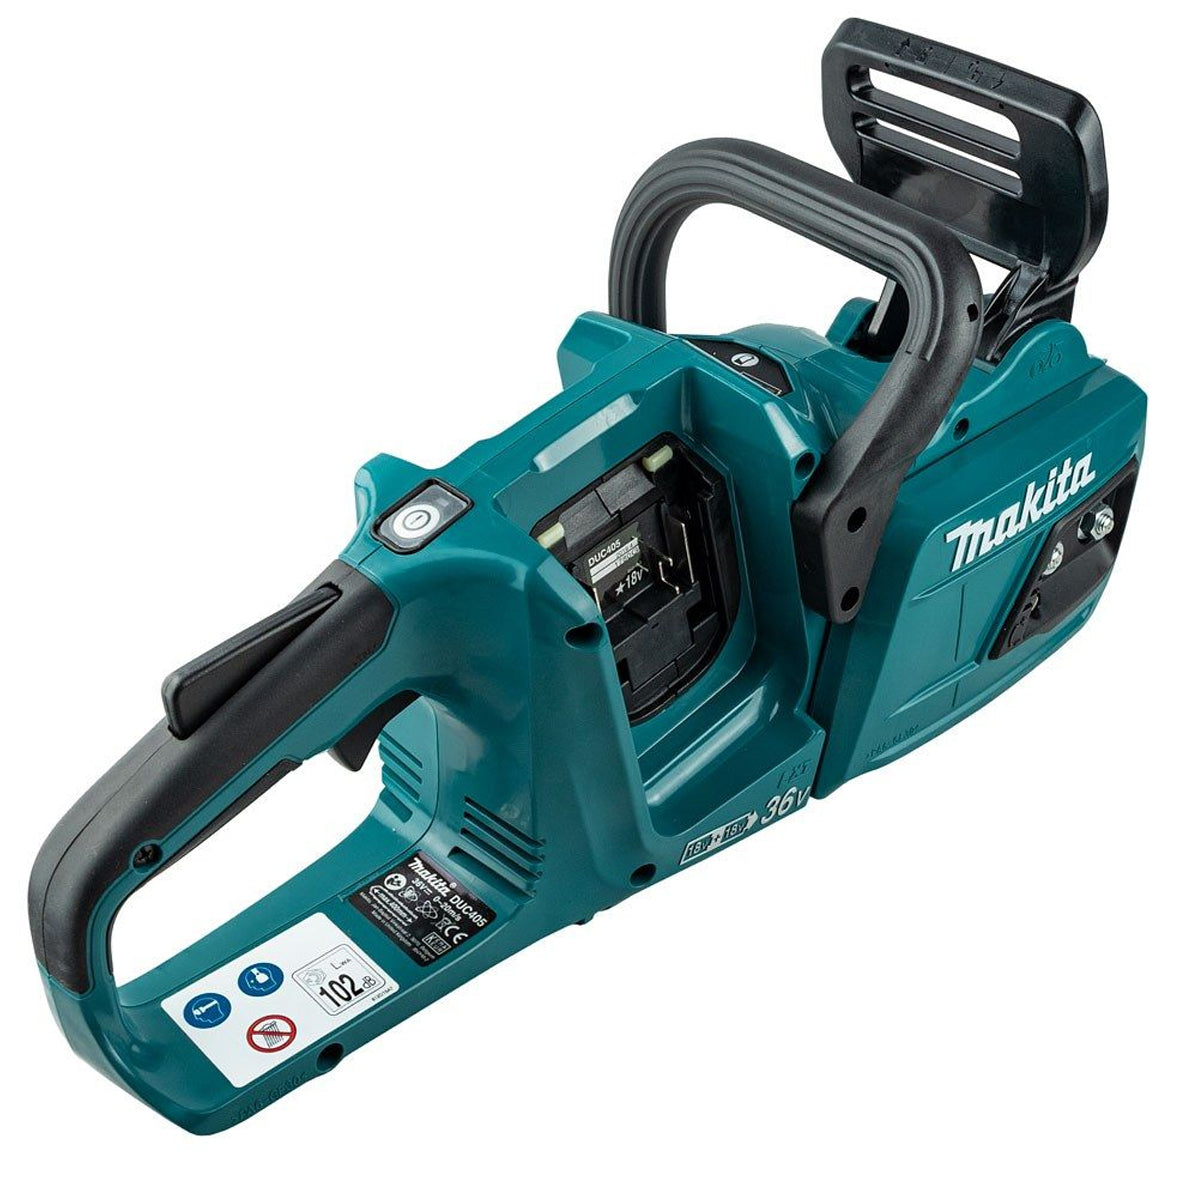 Makita DUC405Z 36V LXT Cordless Brushless Chainsaw Body Only